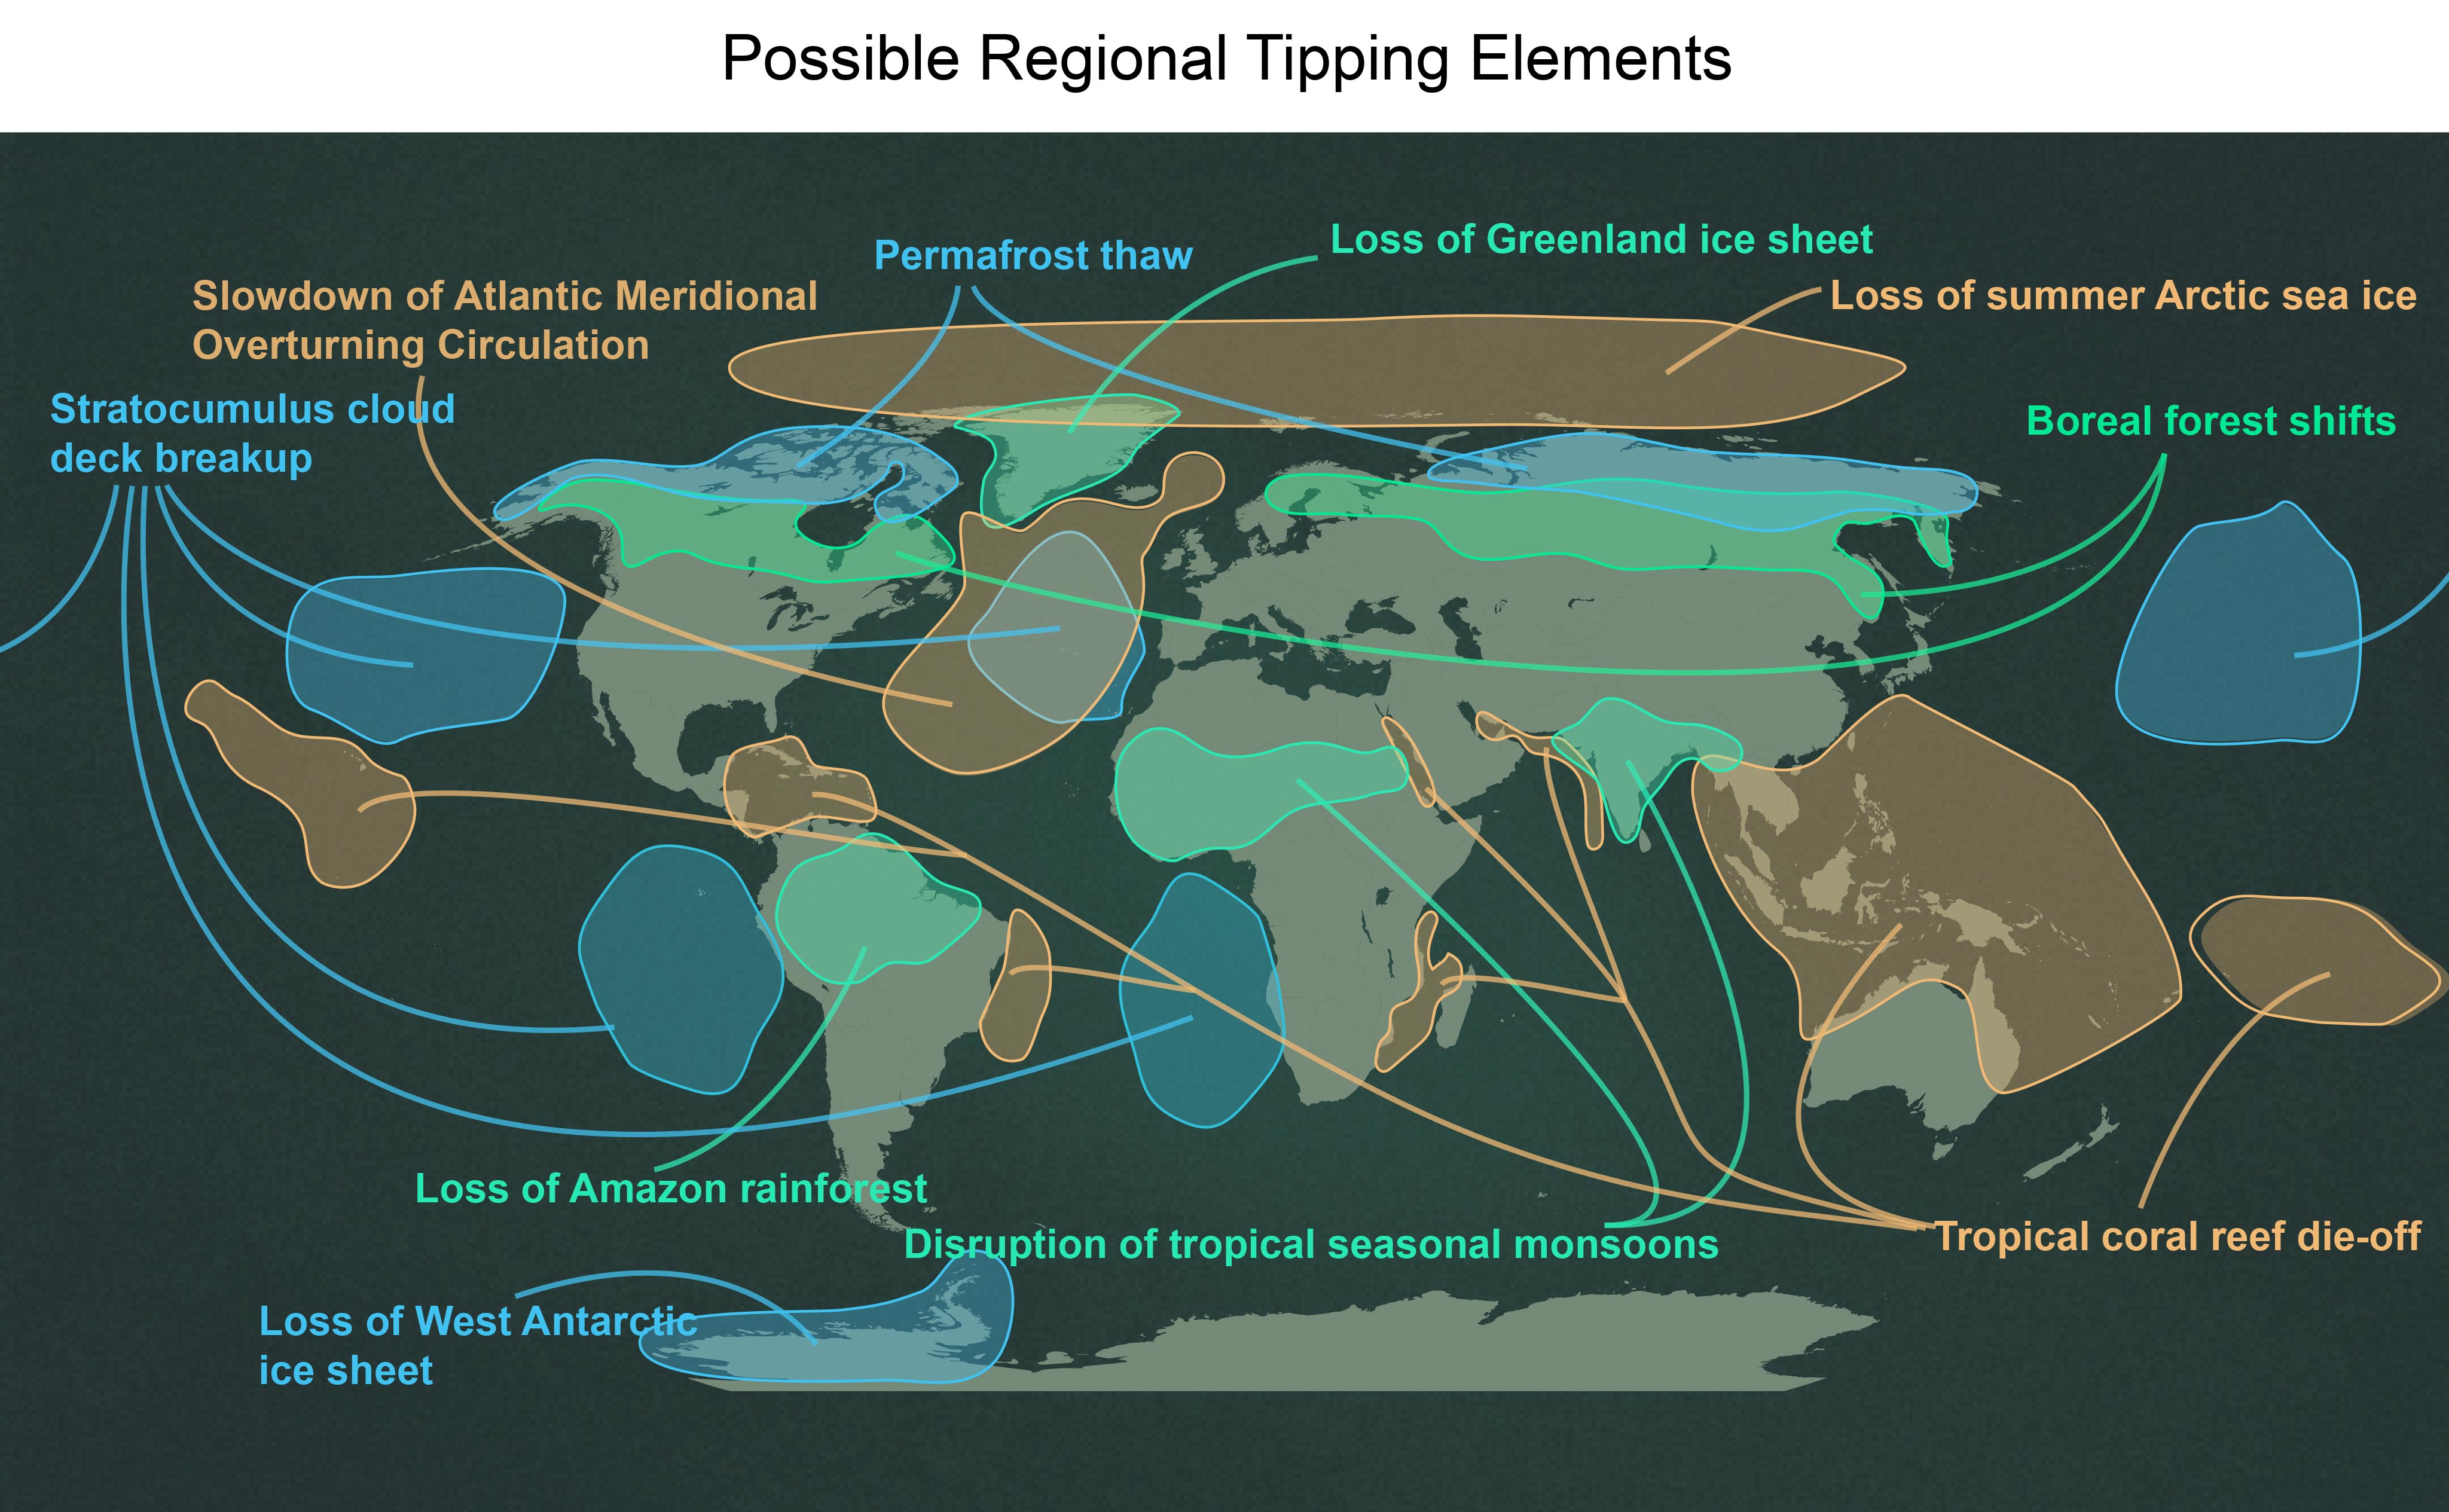 Possible Regional Tipping Elements